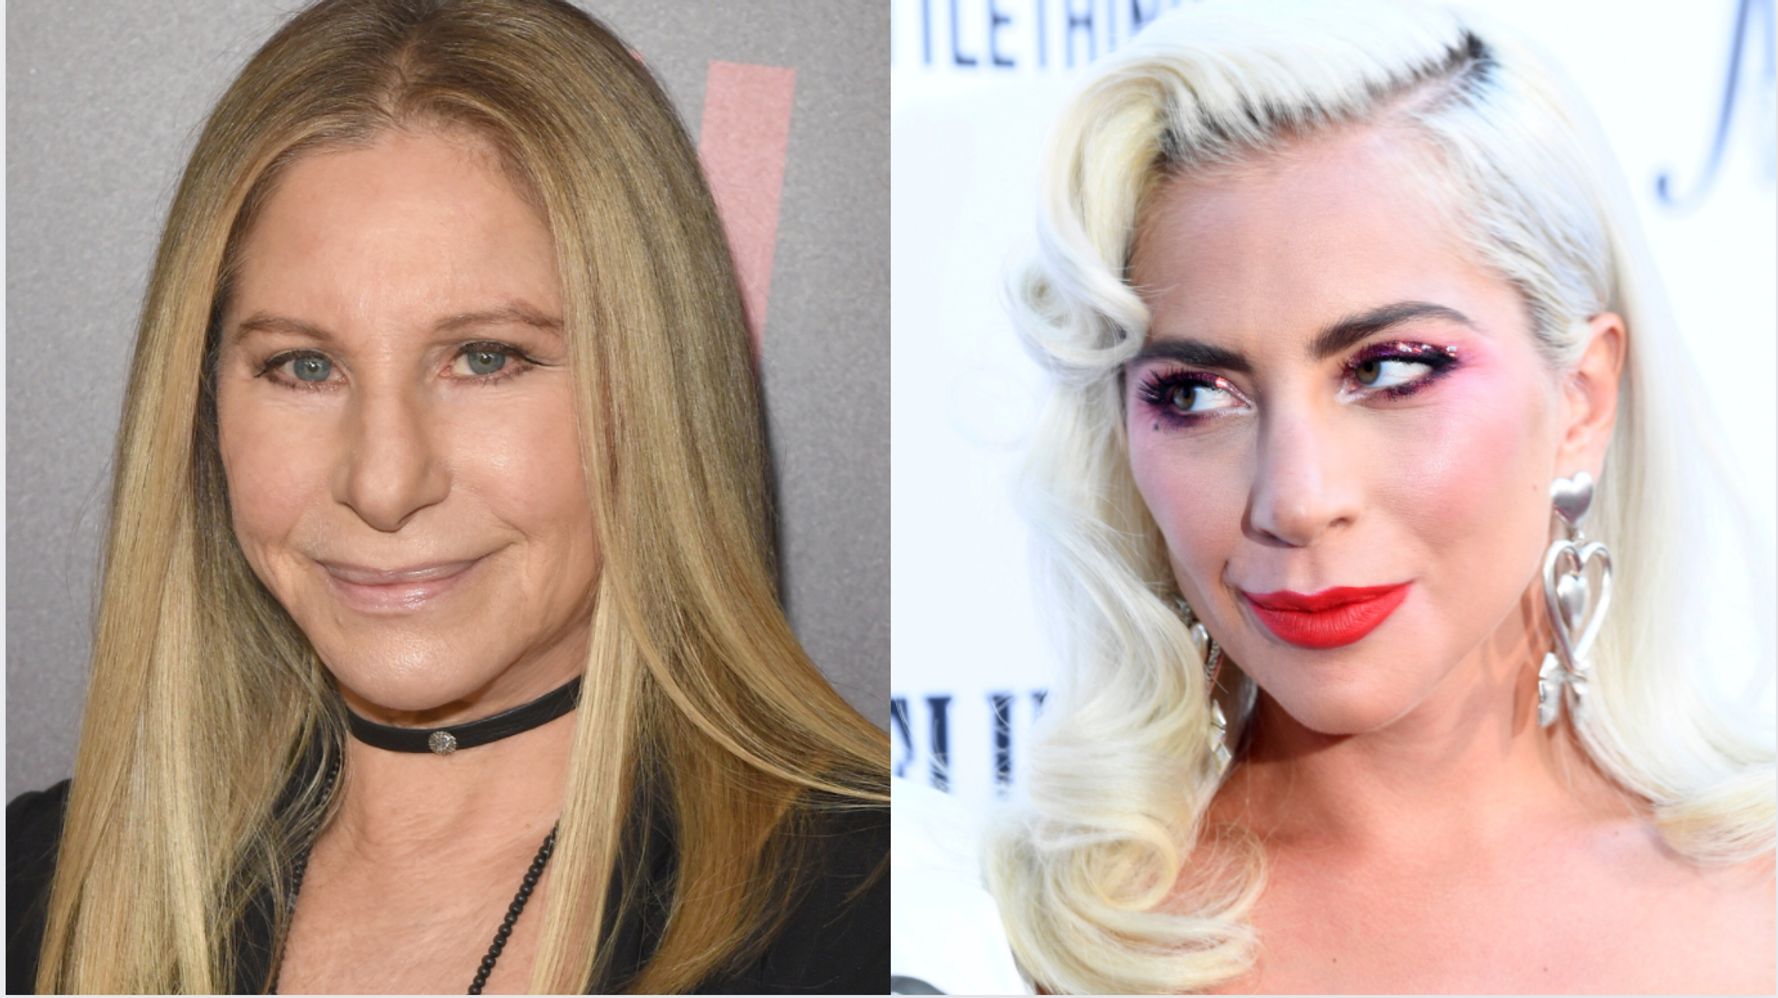 Barbra Streisand Took Another Look And Shaded Lady Gaga's A